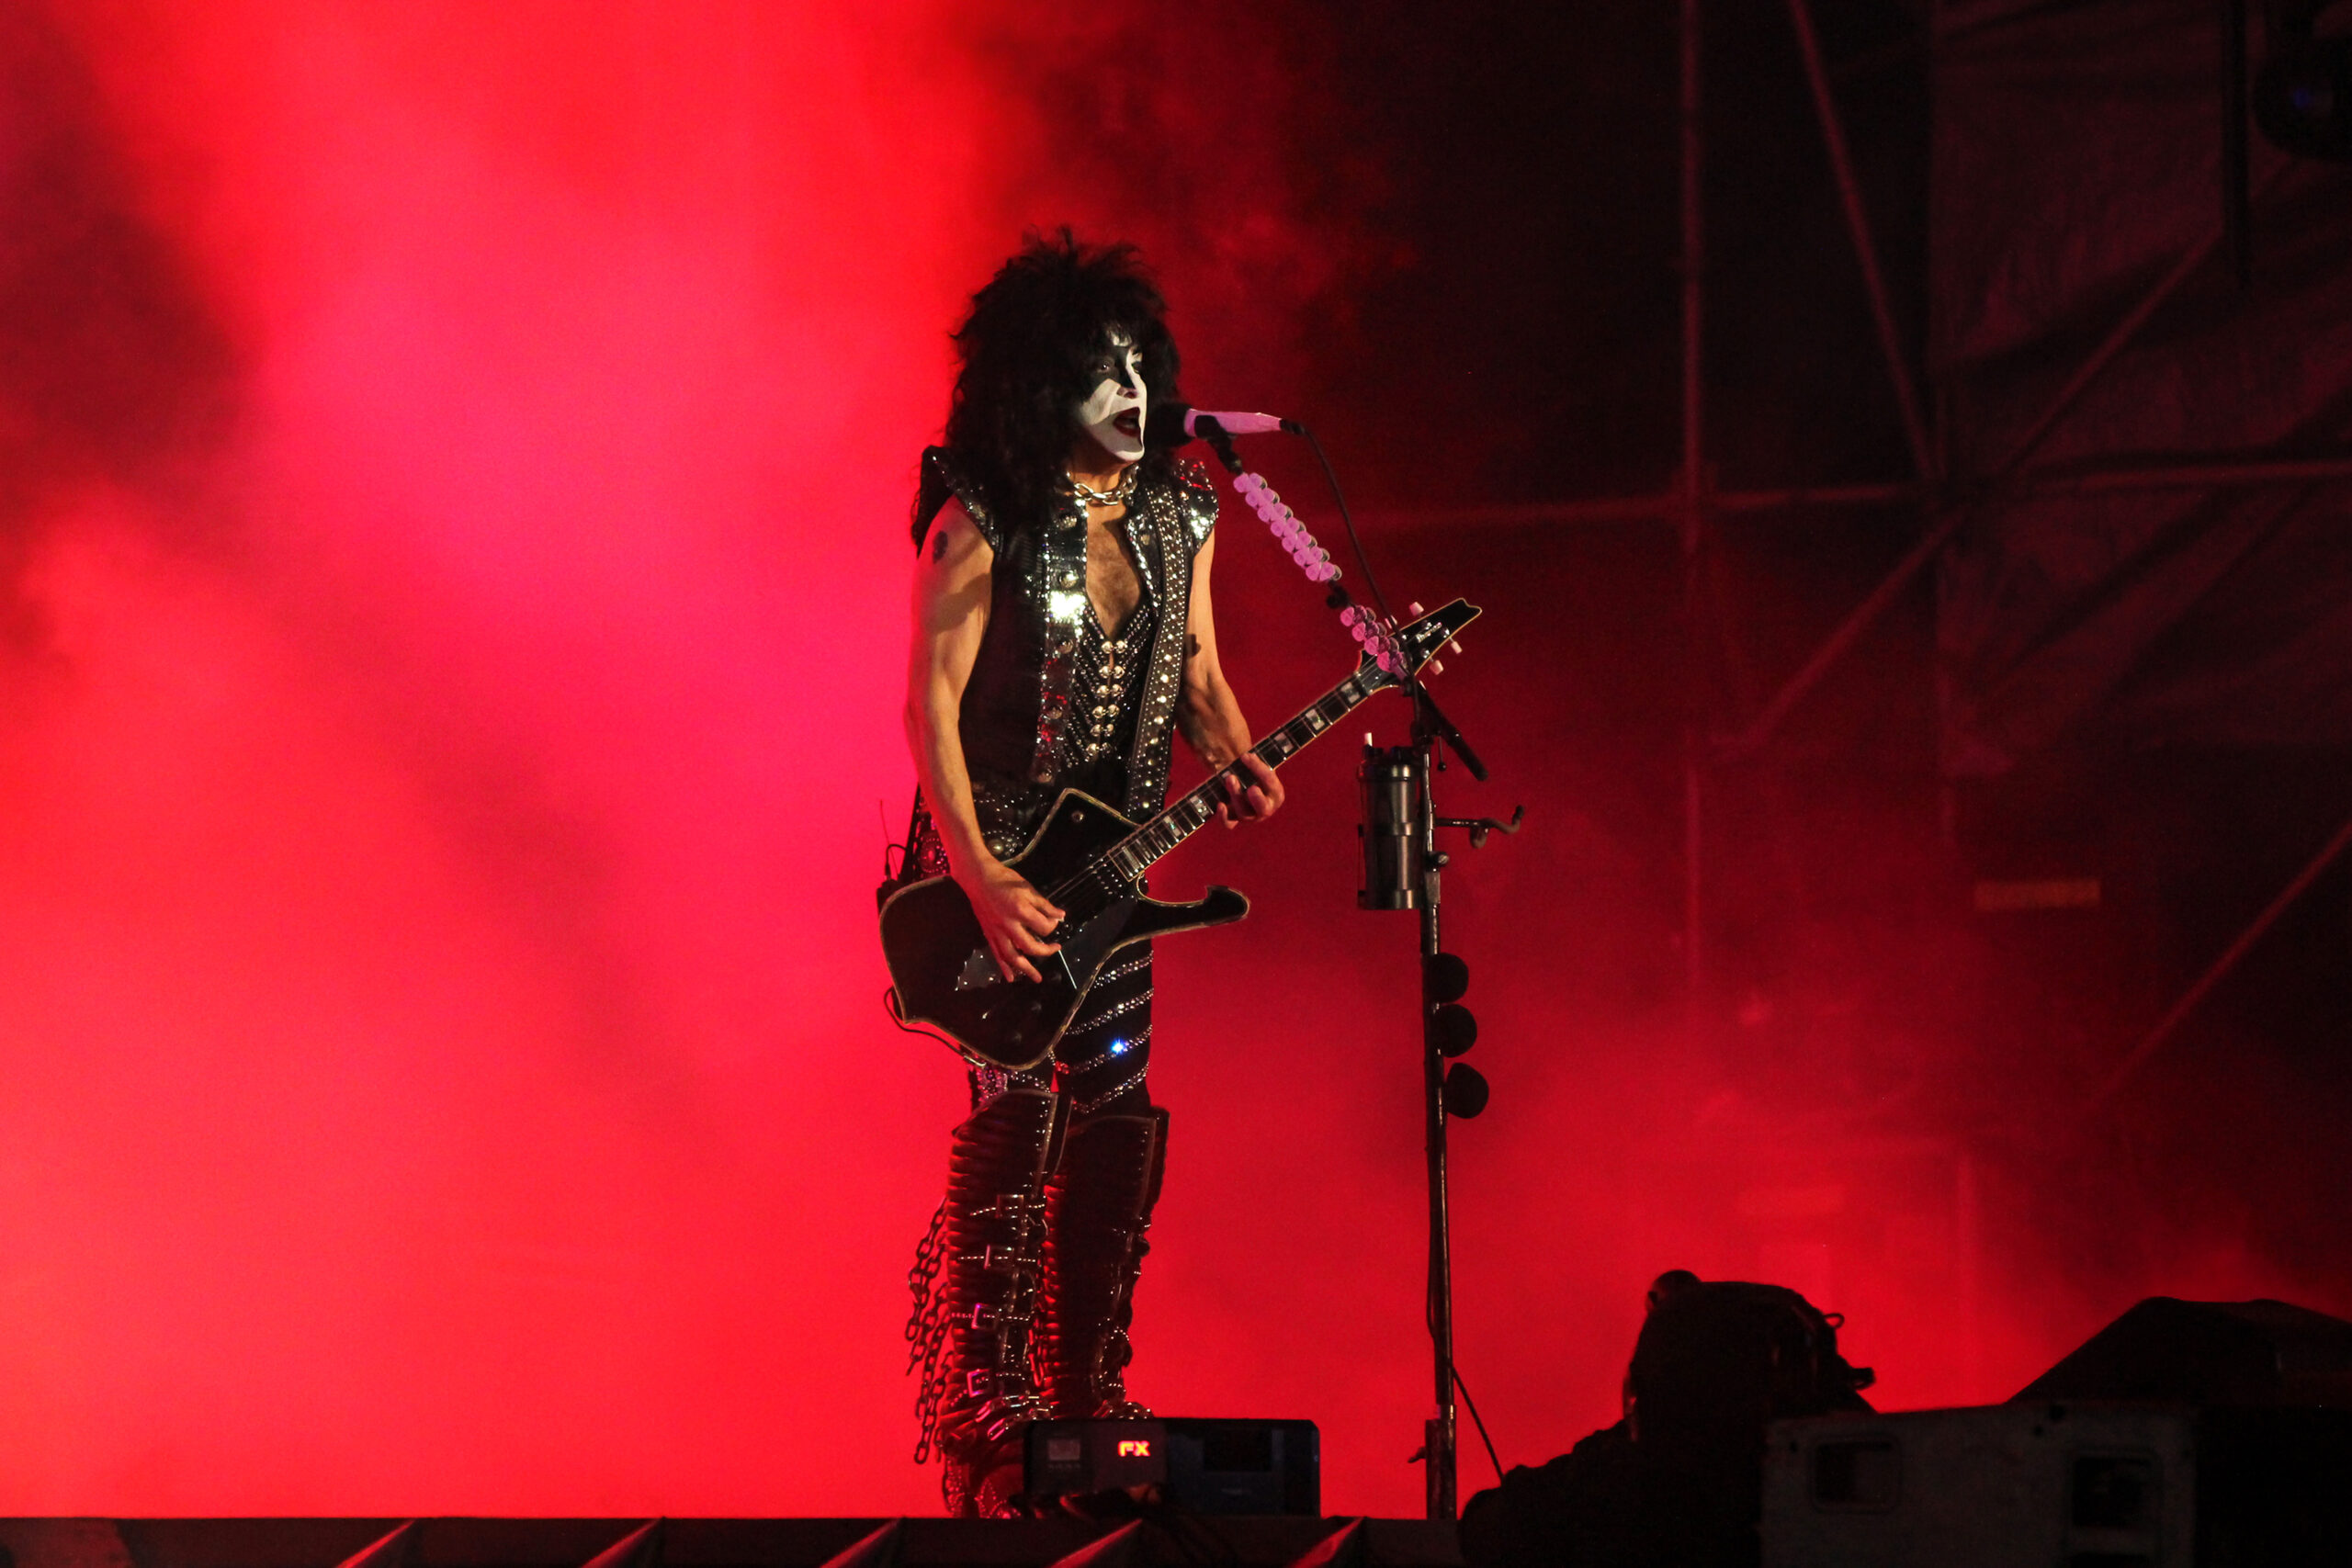 KISS Co-Founder Paul Stanley Calls Normalizing Child Sex Changes A ‘Sad And Dangerous Fad’